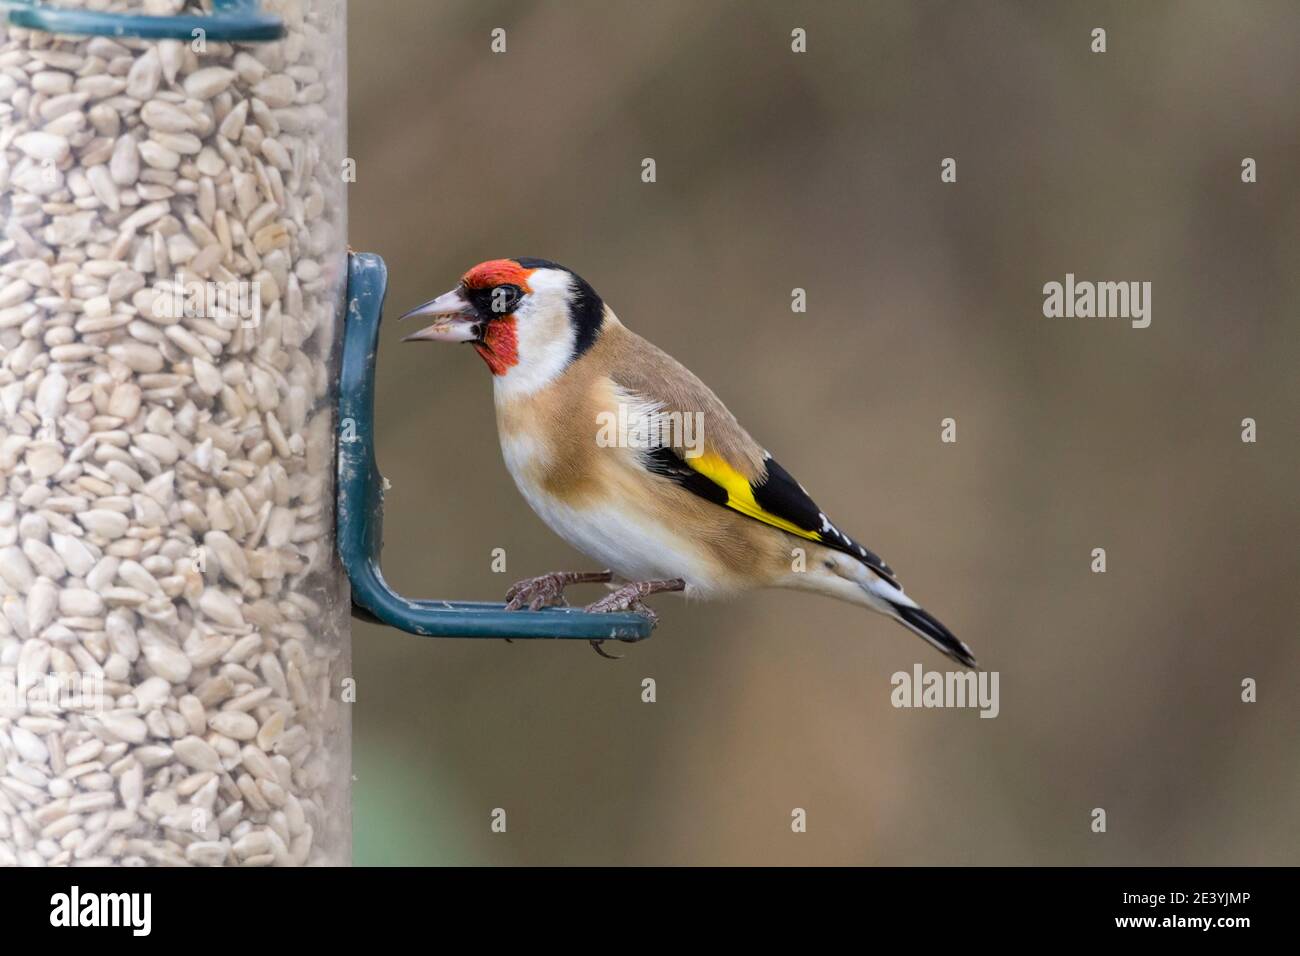 Goldfinch Carduelis carduelis striking banded black white and ruby red head brilliant yellow and black wings with white spots on tail feathers Stock Photo